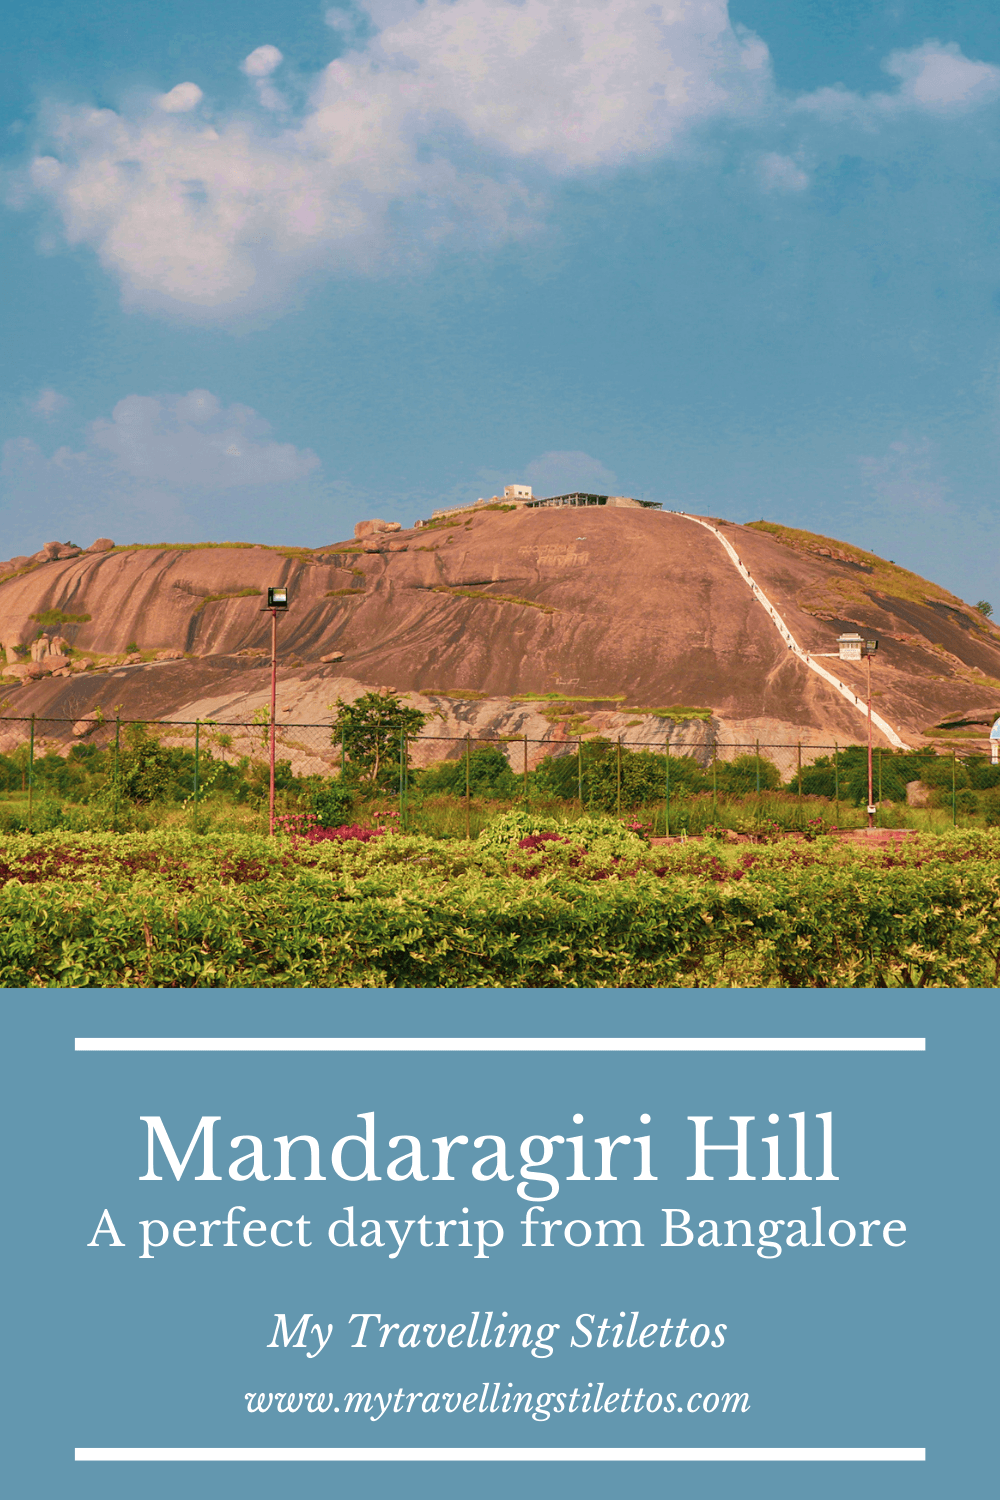 A perfect daytrip to Mandaragiri Hill from Bangalore